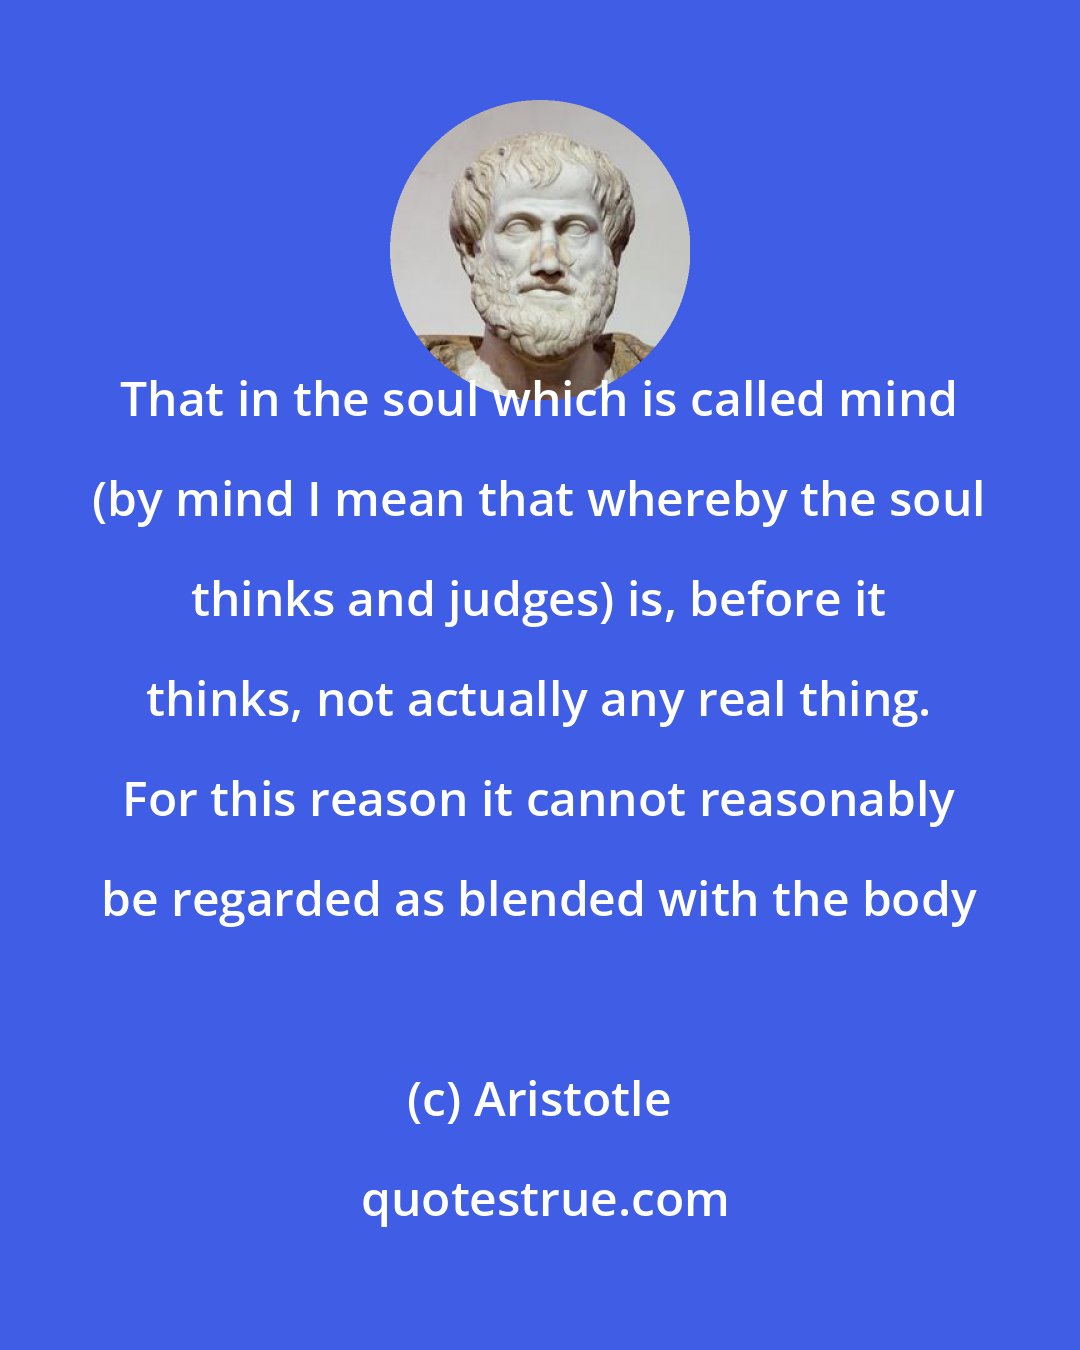 Aristotle: That in the soul which is called mind (by mind I mean that whereby the soul thinks and judges) is, before it thinks, not actually any real thing. For this reason it cannot reasonably be regarded as blended with the body